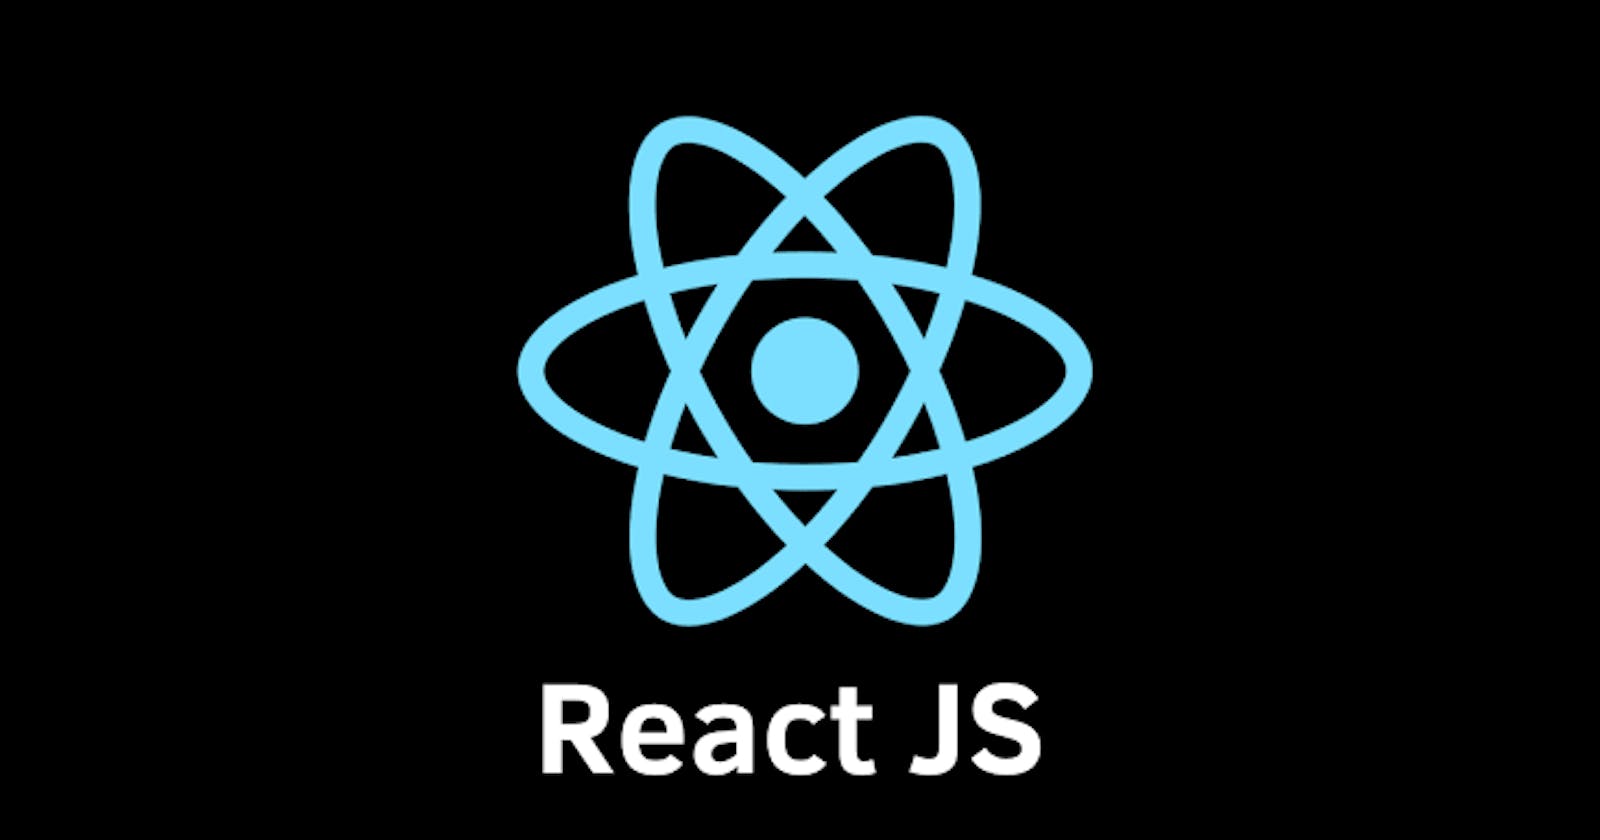 Let's talk about React Props and State